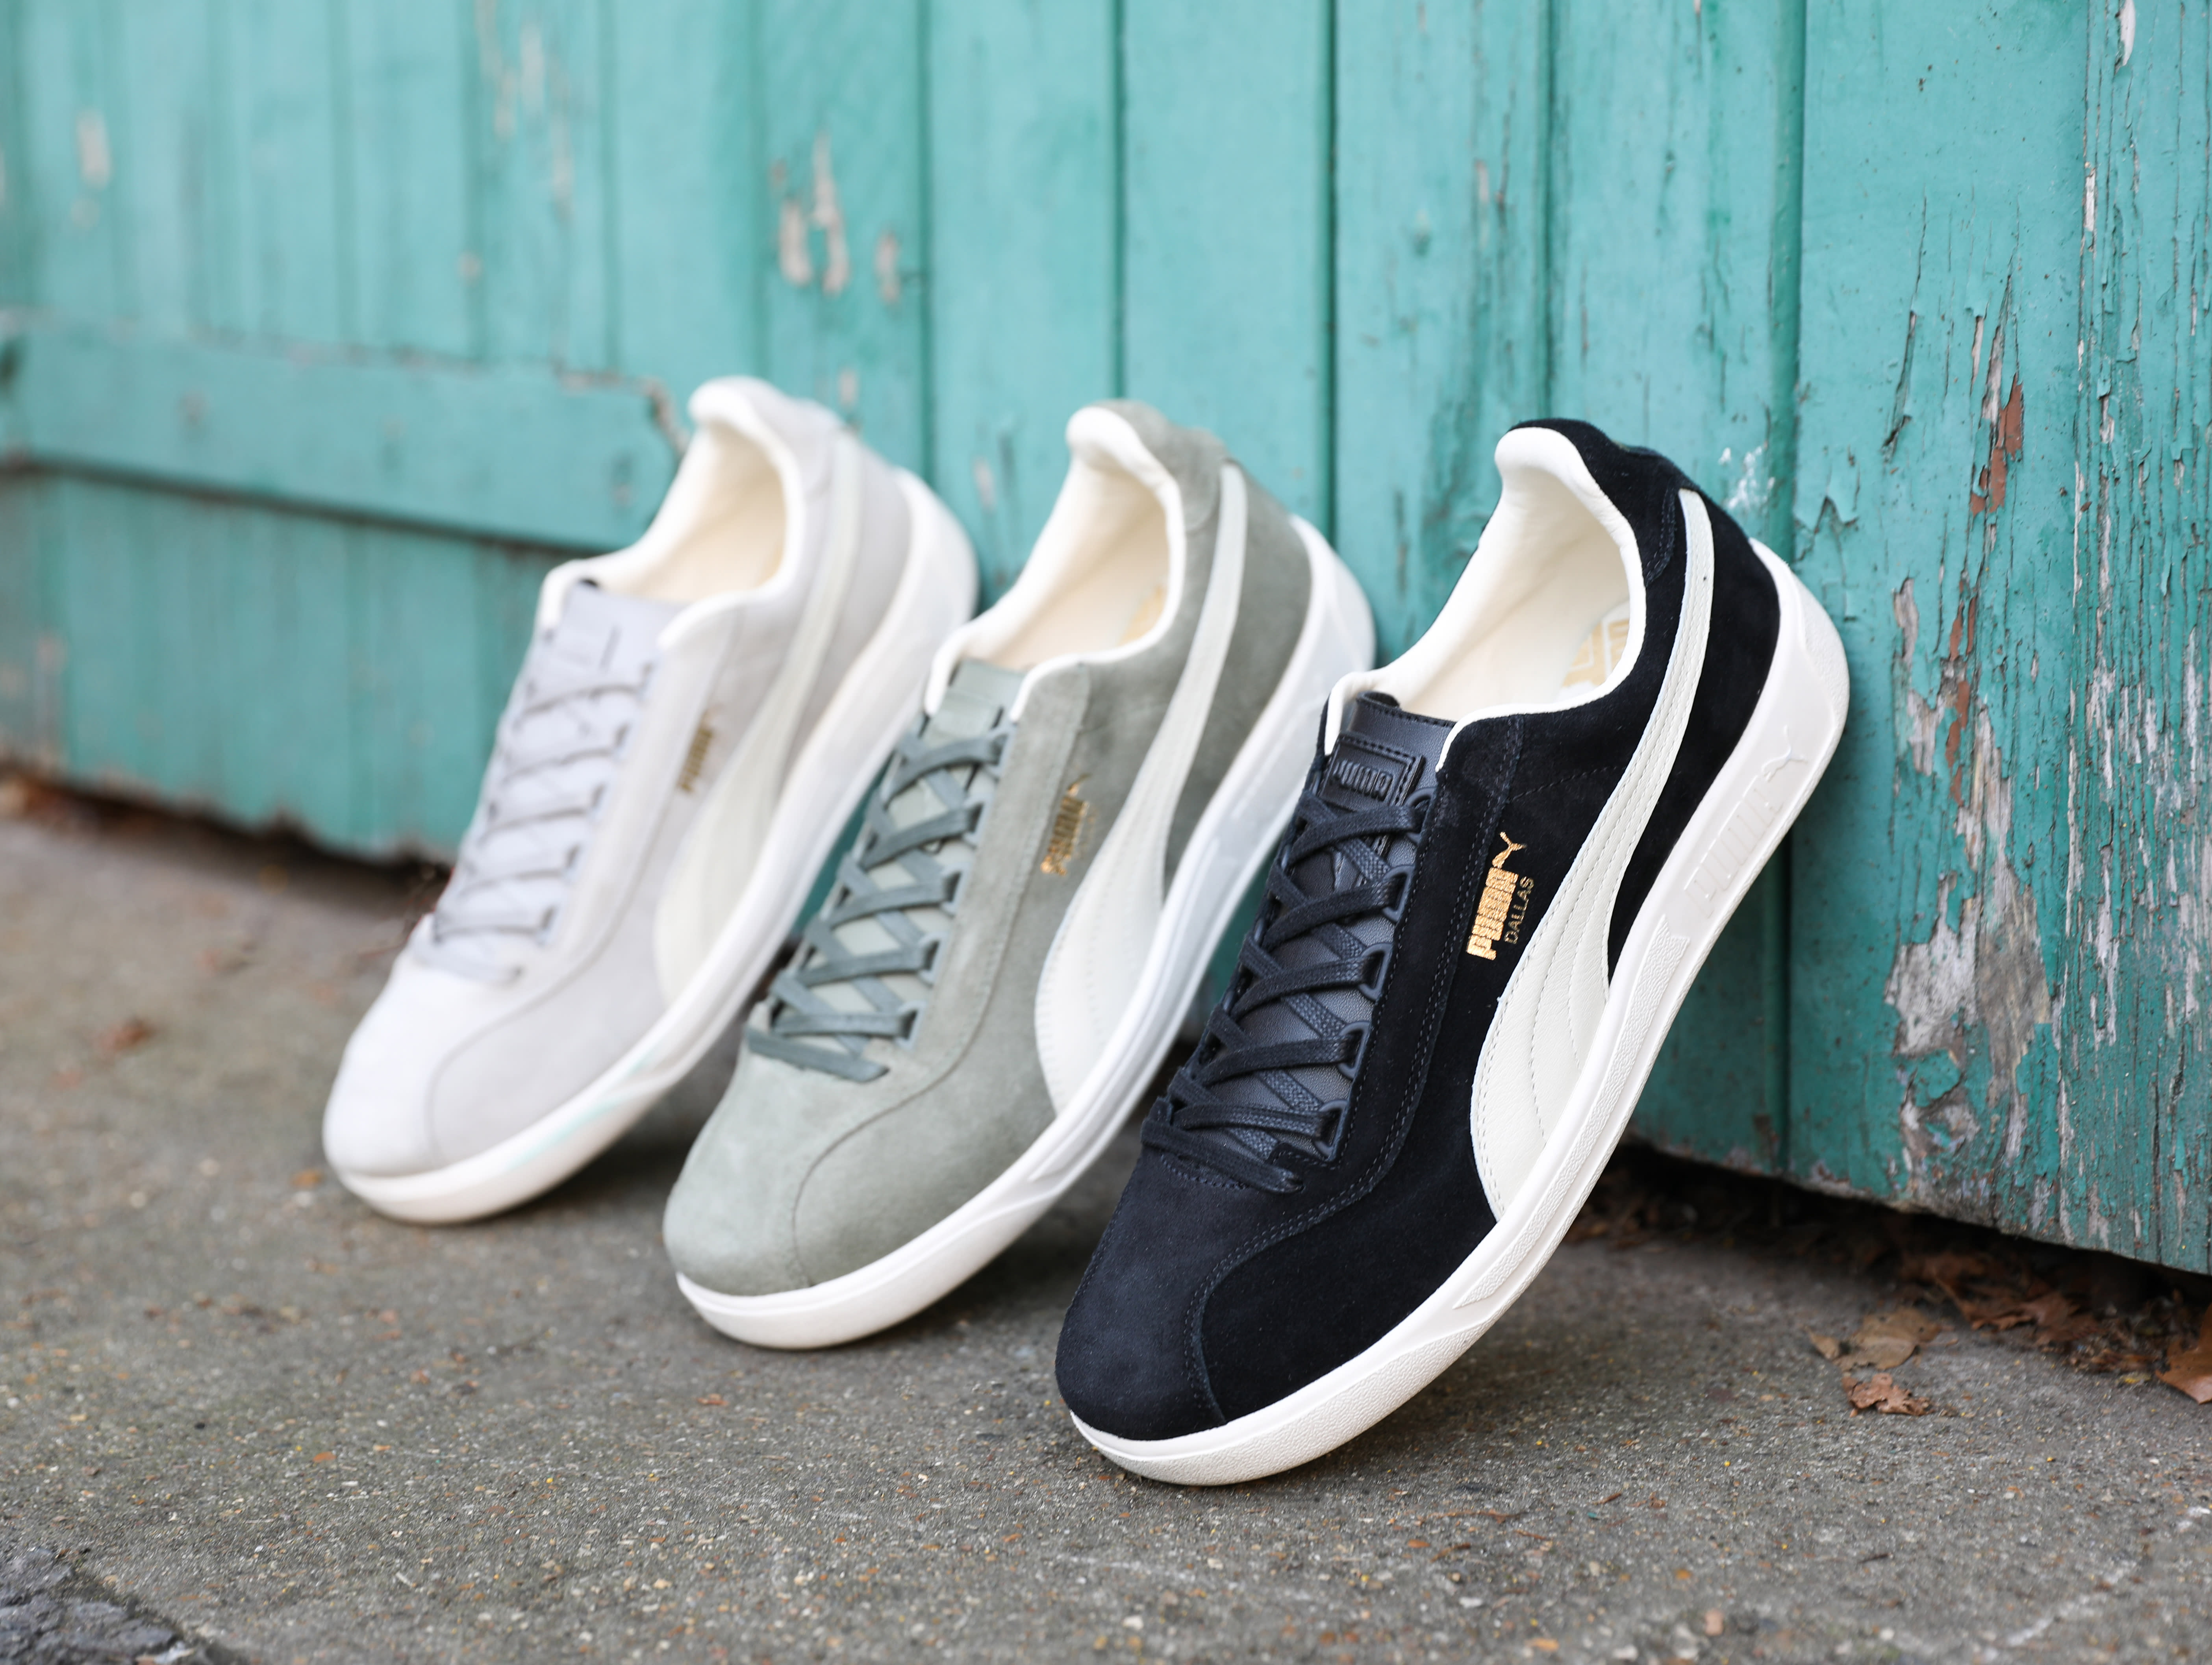 puma-ss-17-terrace-collection-3